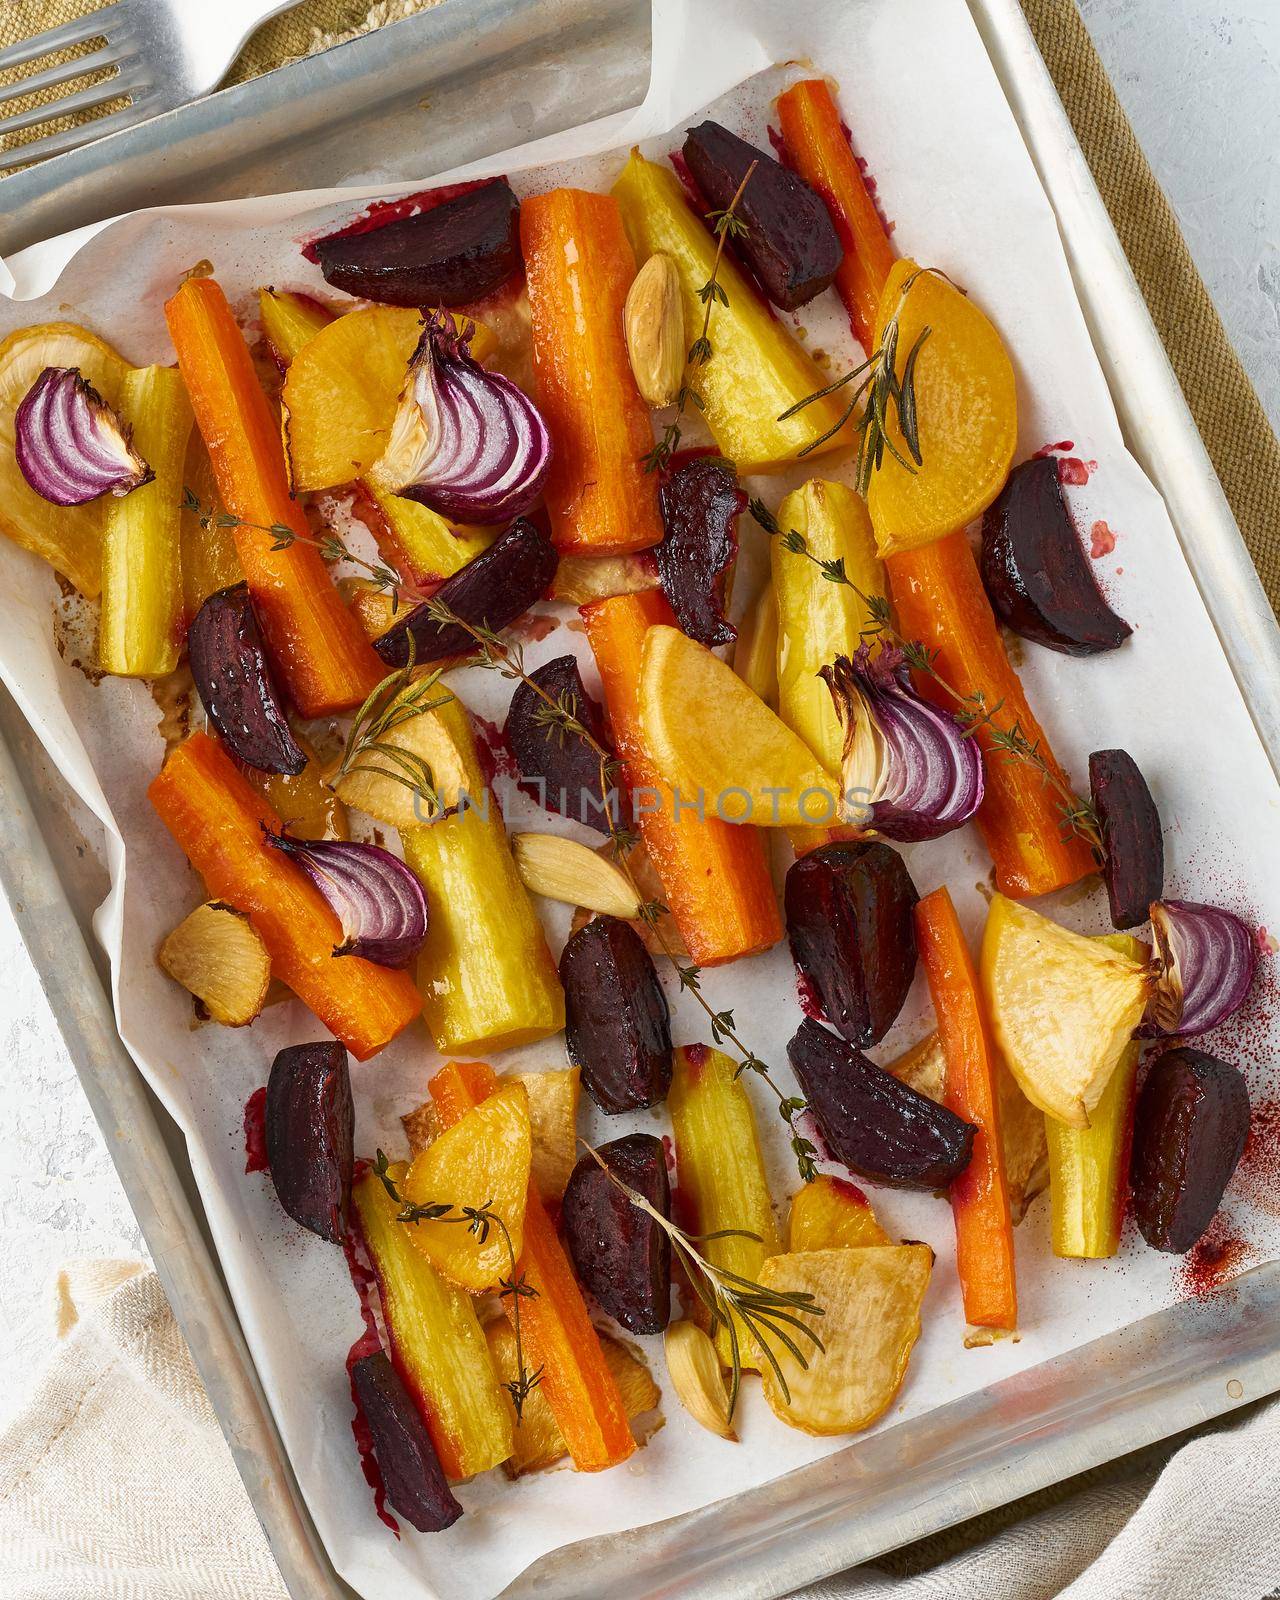 Colorful roasted vegetables on tray with parchment. Mix of carrots, beets, turnips, rutabaga, onions. Vegetarianism, veganism, proper nutrition, lchf. Top view